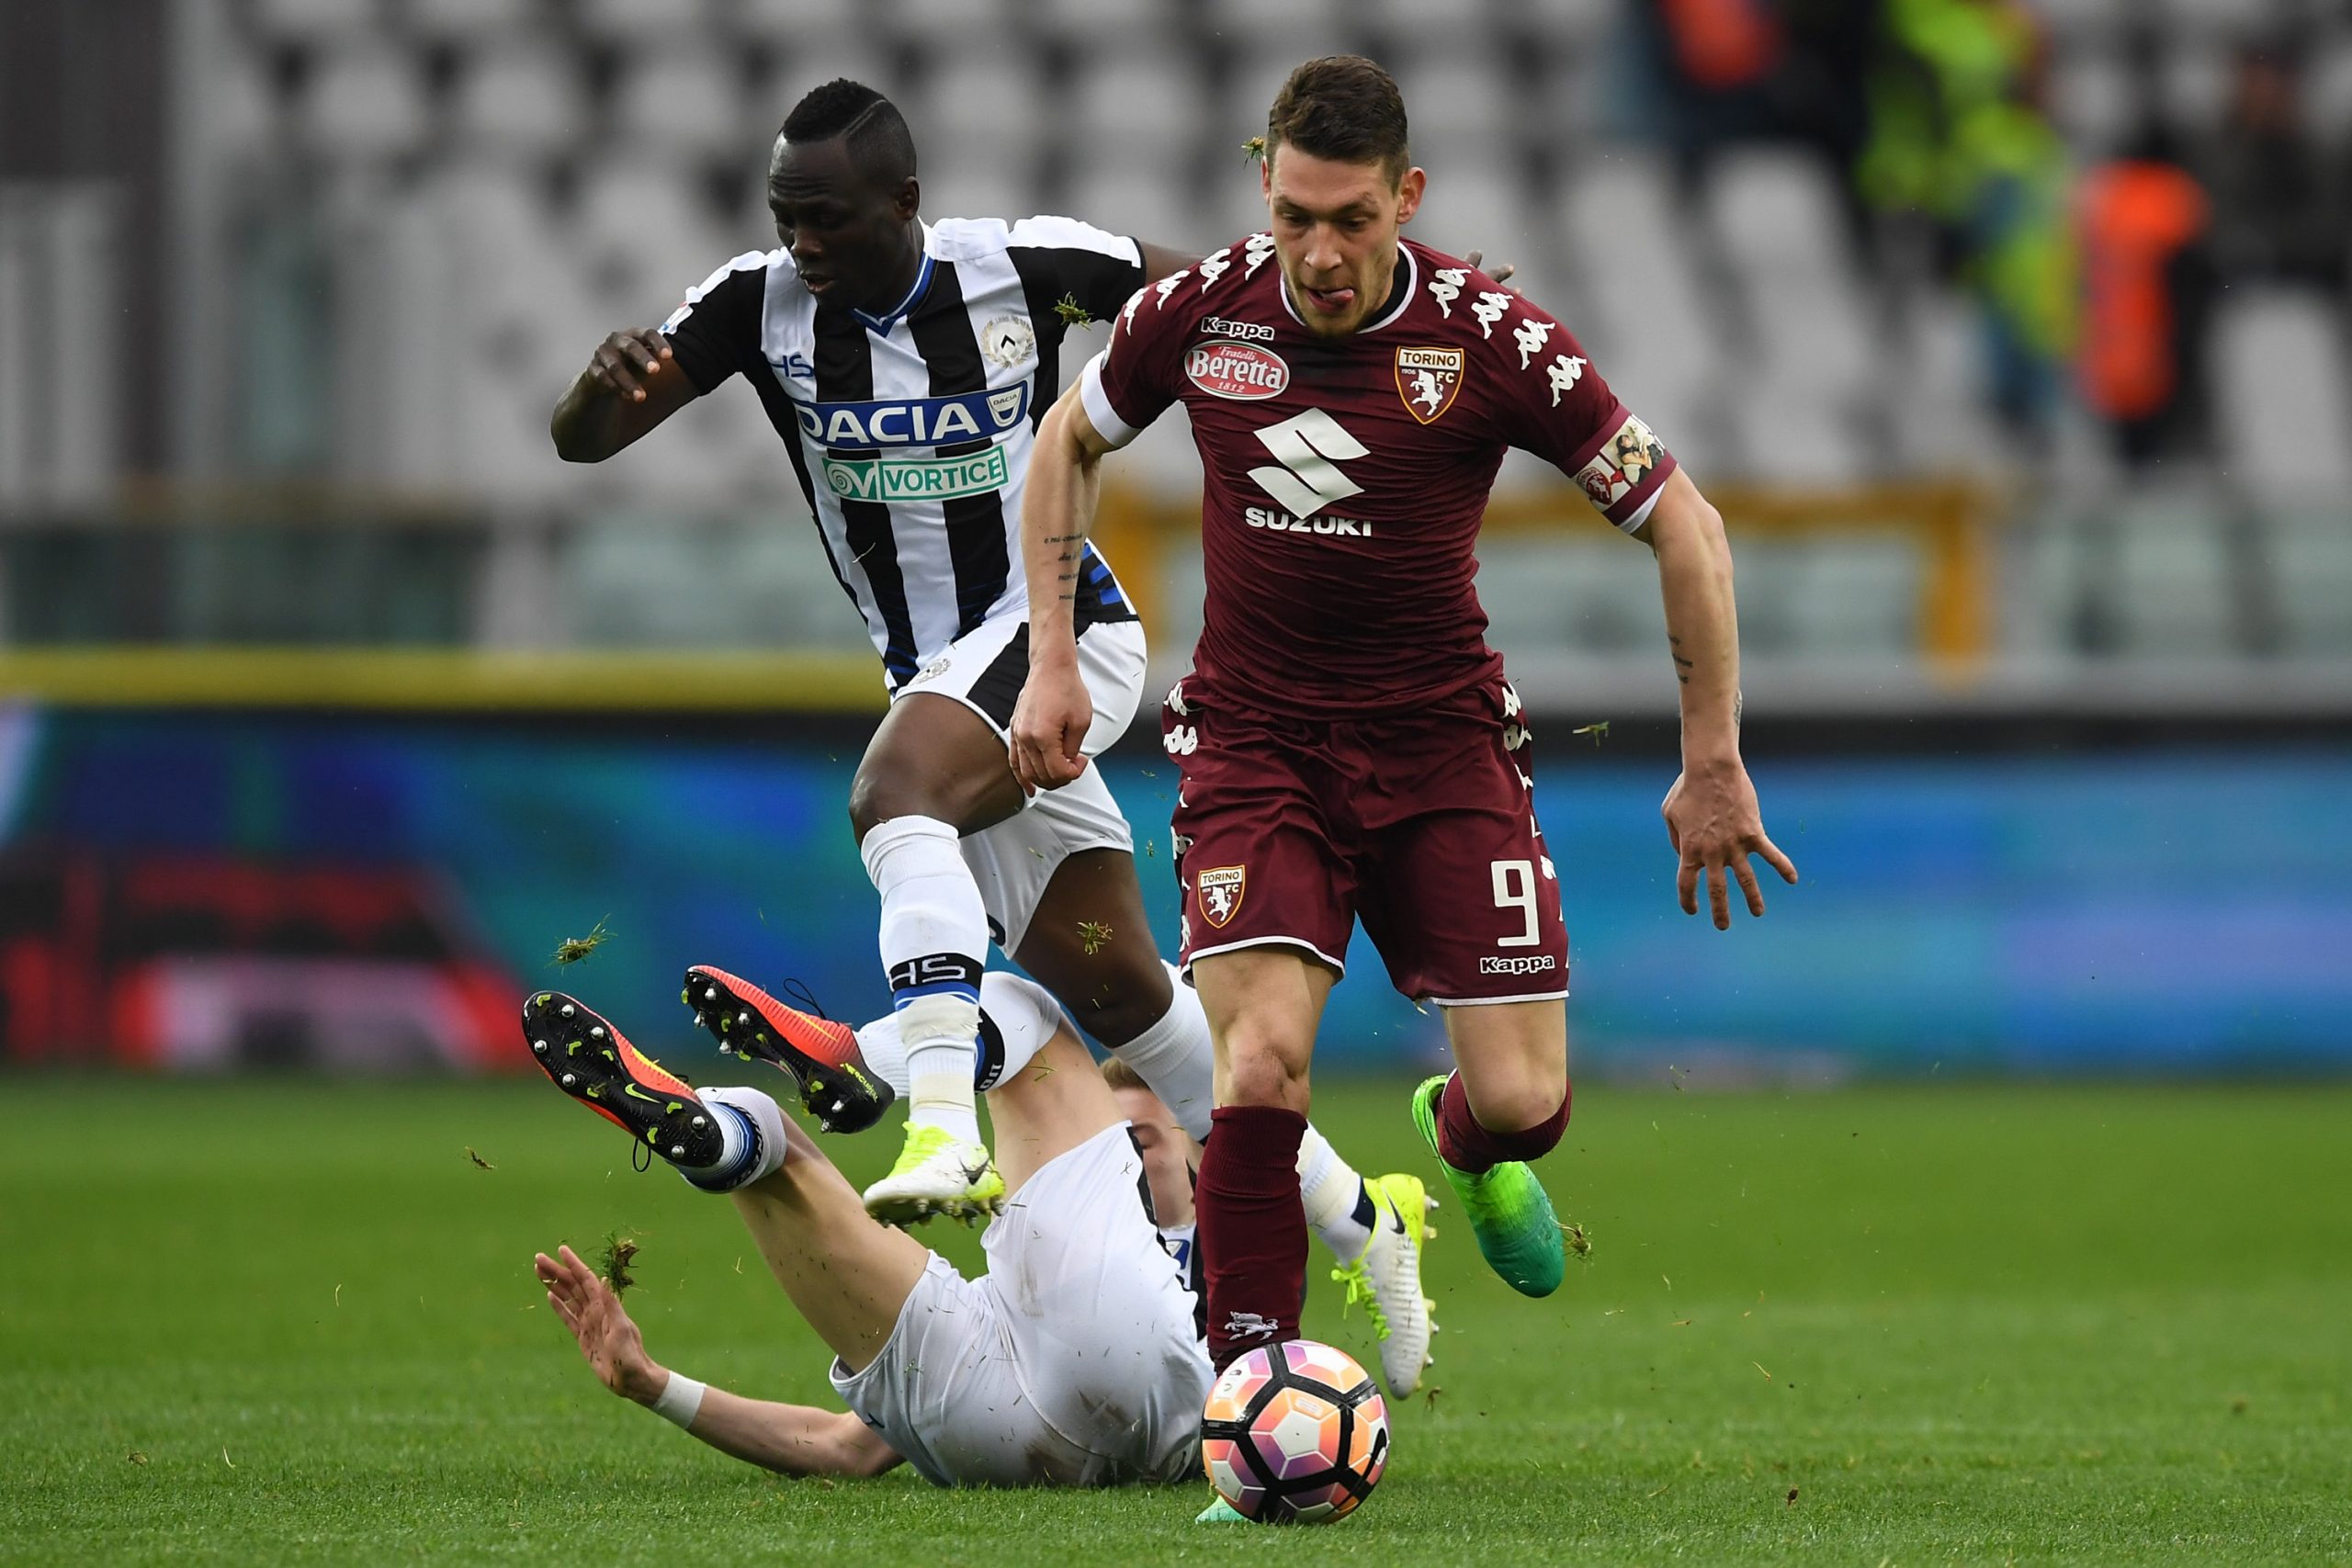 Andrea Belotti (R) of FC Torino in action against Emmanuel Badu (R) and Jakub Jankto of Udinese Calcio during the Serie A match between FC Torino and Udinese Calcio at Stadio Olimpico di Torino on April 2, 2017 in Turin, Italy.  (Photo by Valerio Pennicino/Getty Images)